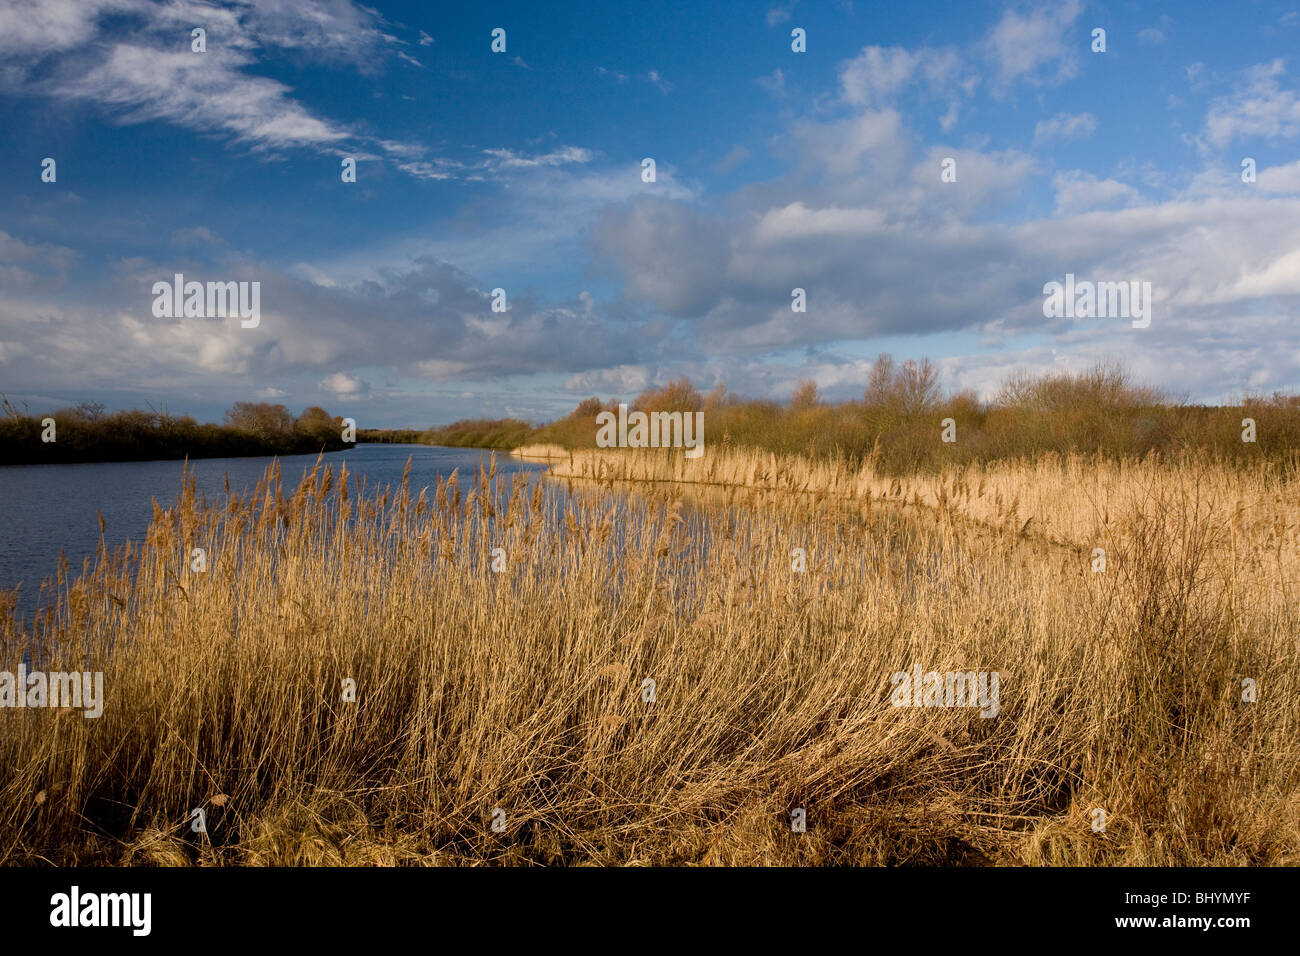 Open water with reed-beds at the Marquenterre Ornithological Park, Somme Estuary, North France. Stock Photo